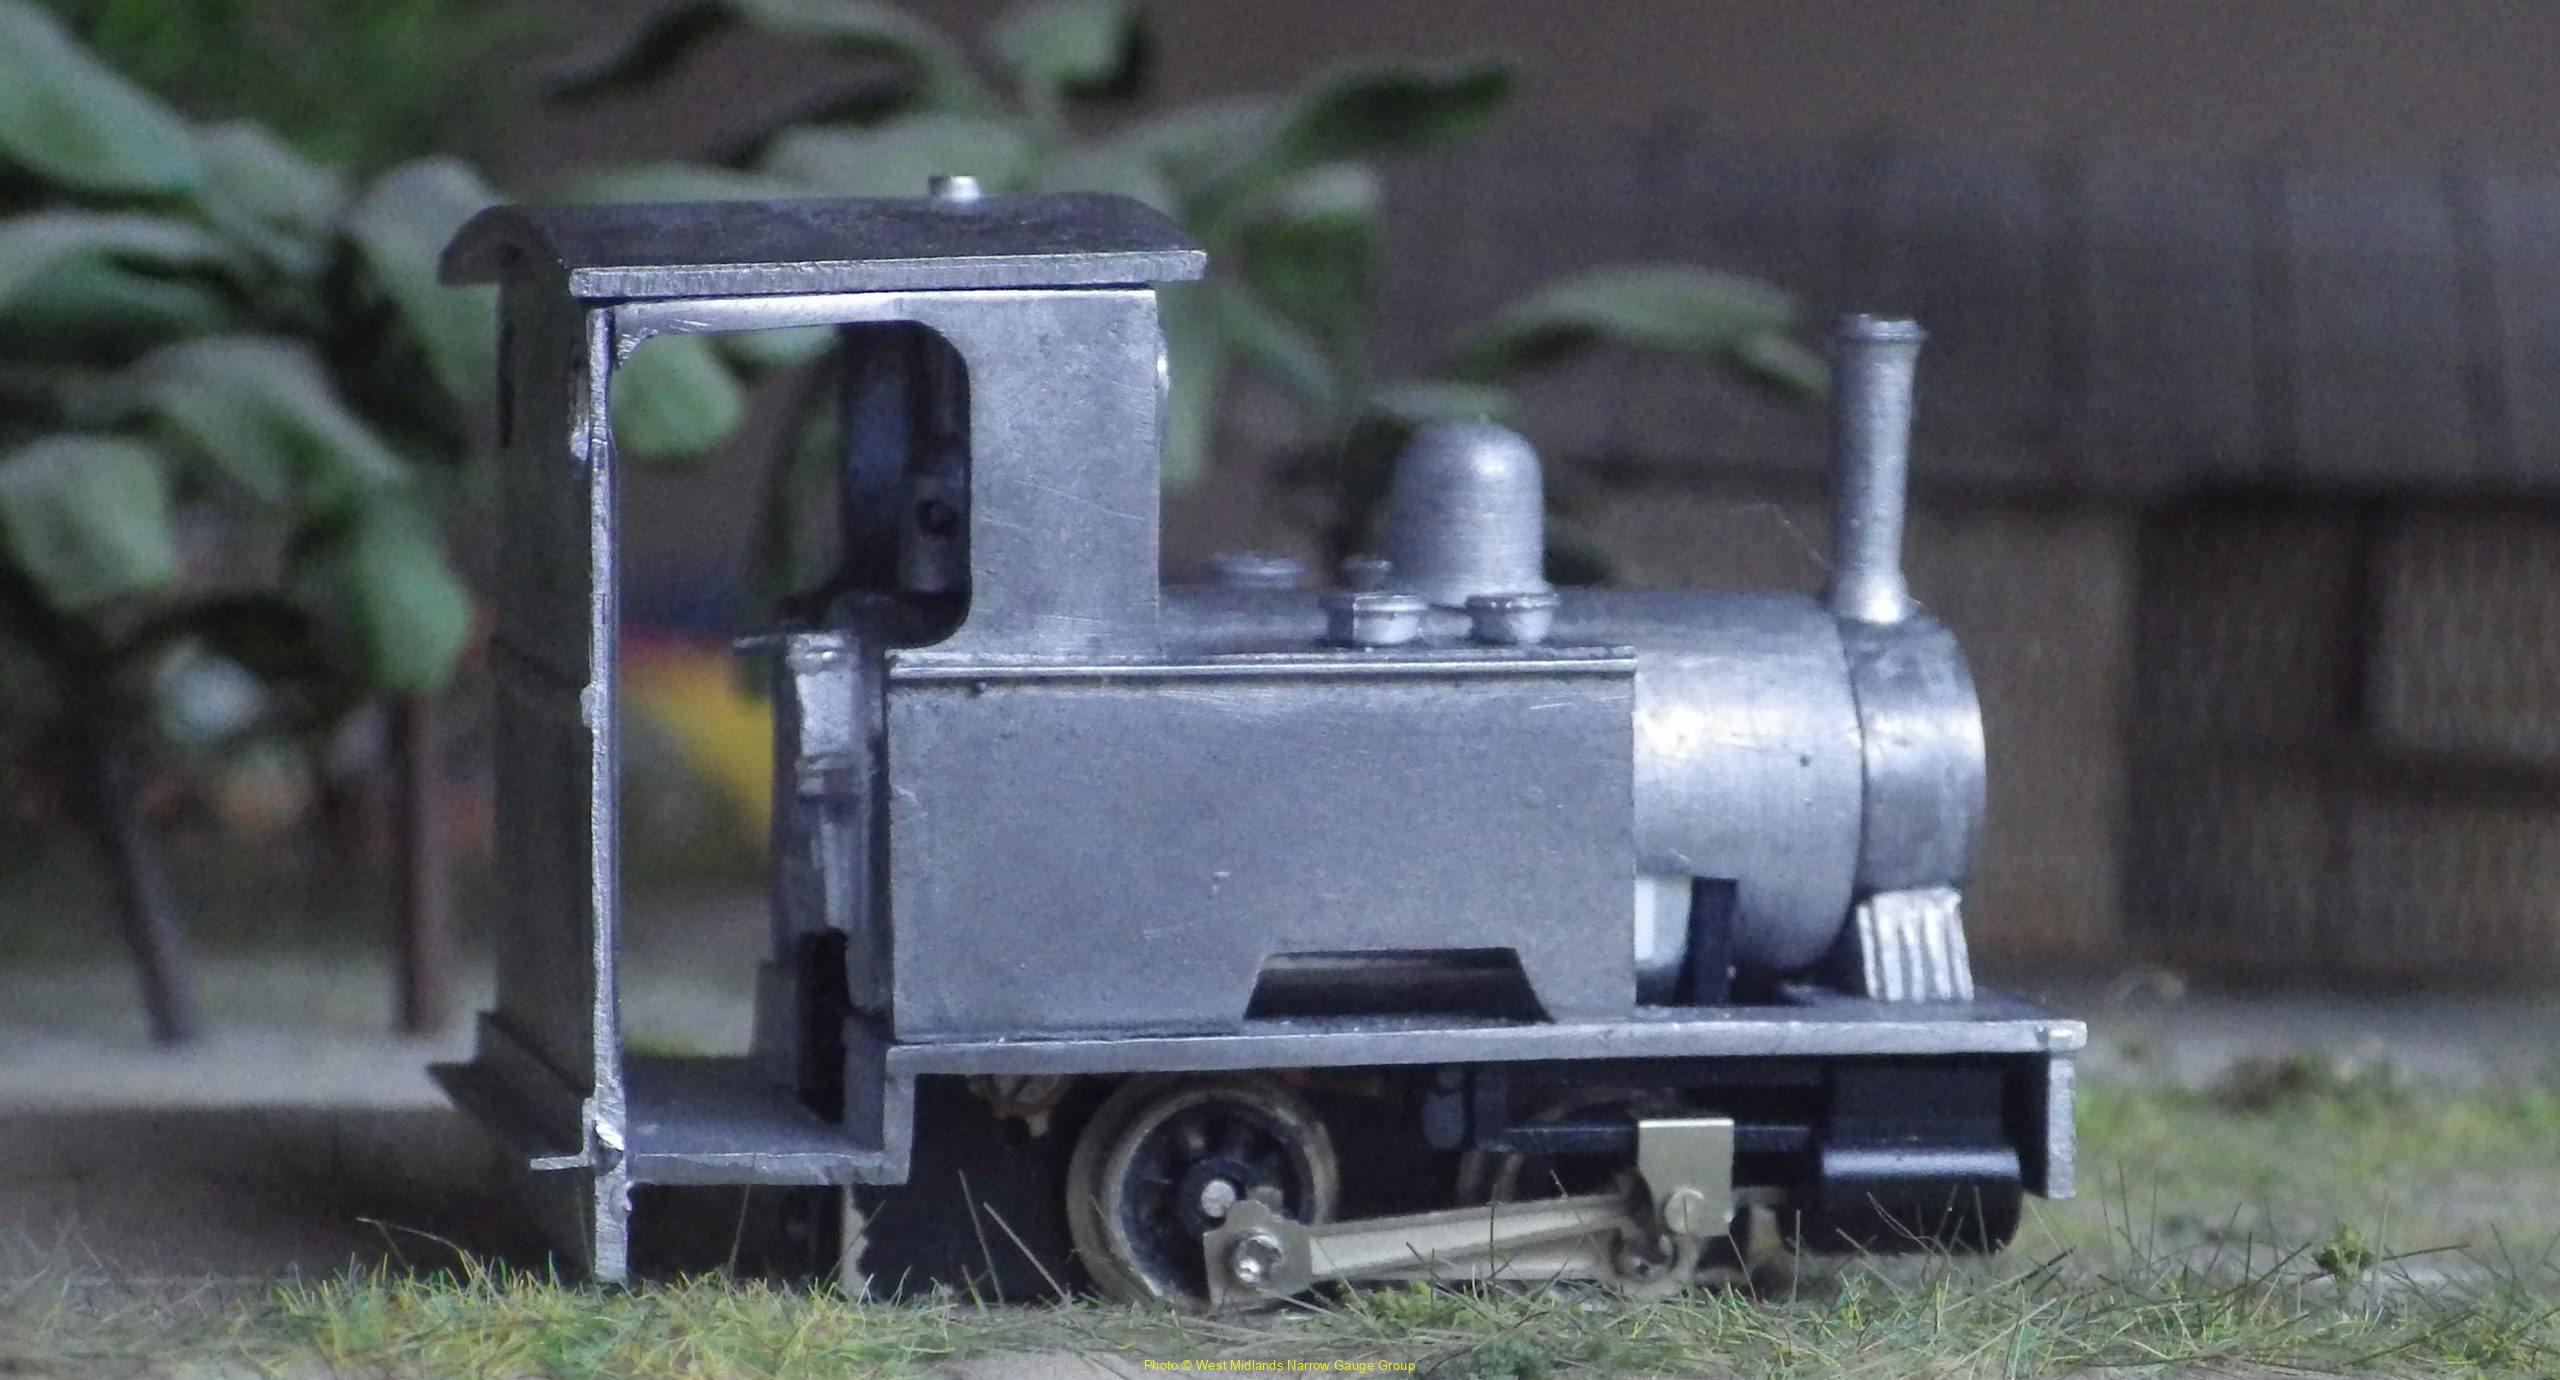 David's N Drive Bagnall.jpg - David Churchill's built but unpainted N-Drive Bagnall "Central" 0-4-0T running on the chassis supplied with the kit. (photo © David Churchill)